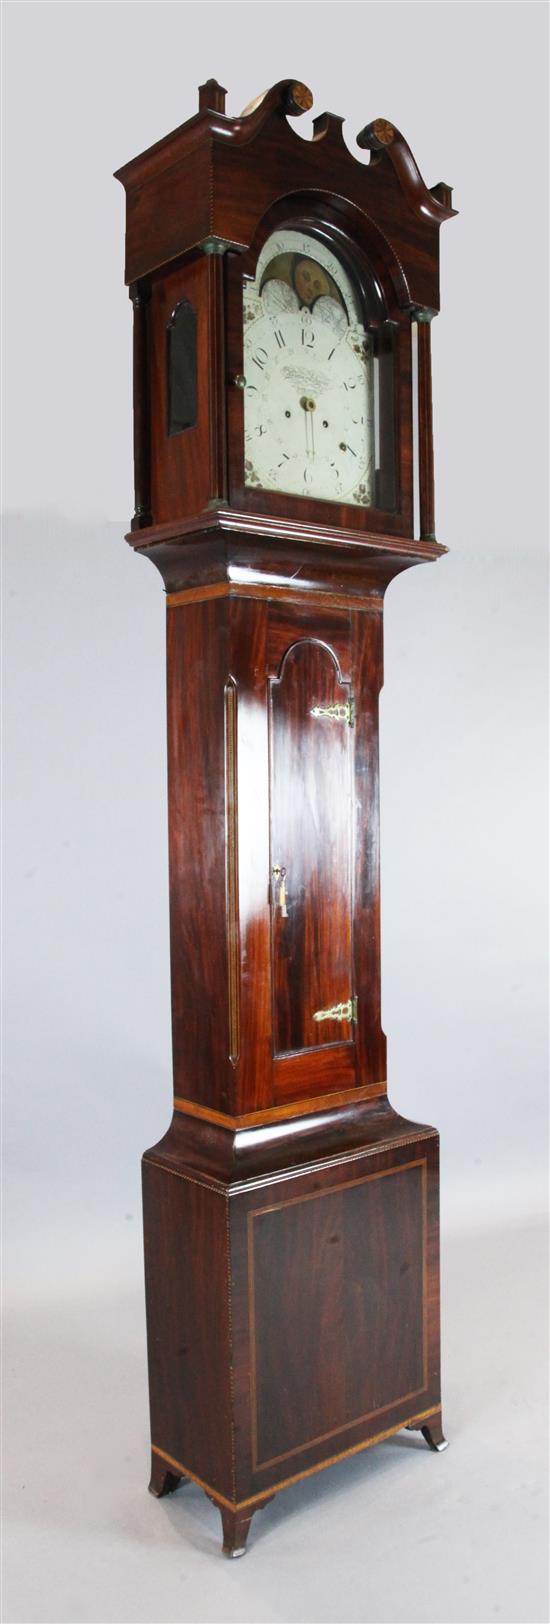 Martin Shreiner of Lancaster. A Federal American mahogany eight day longcase clock H.9ft